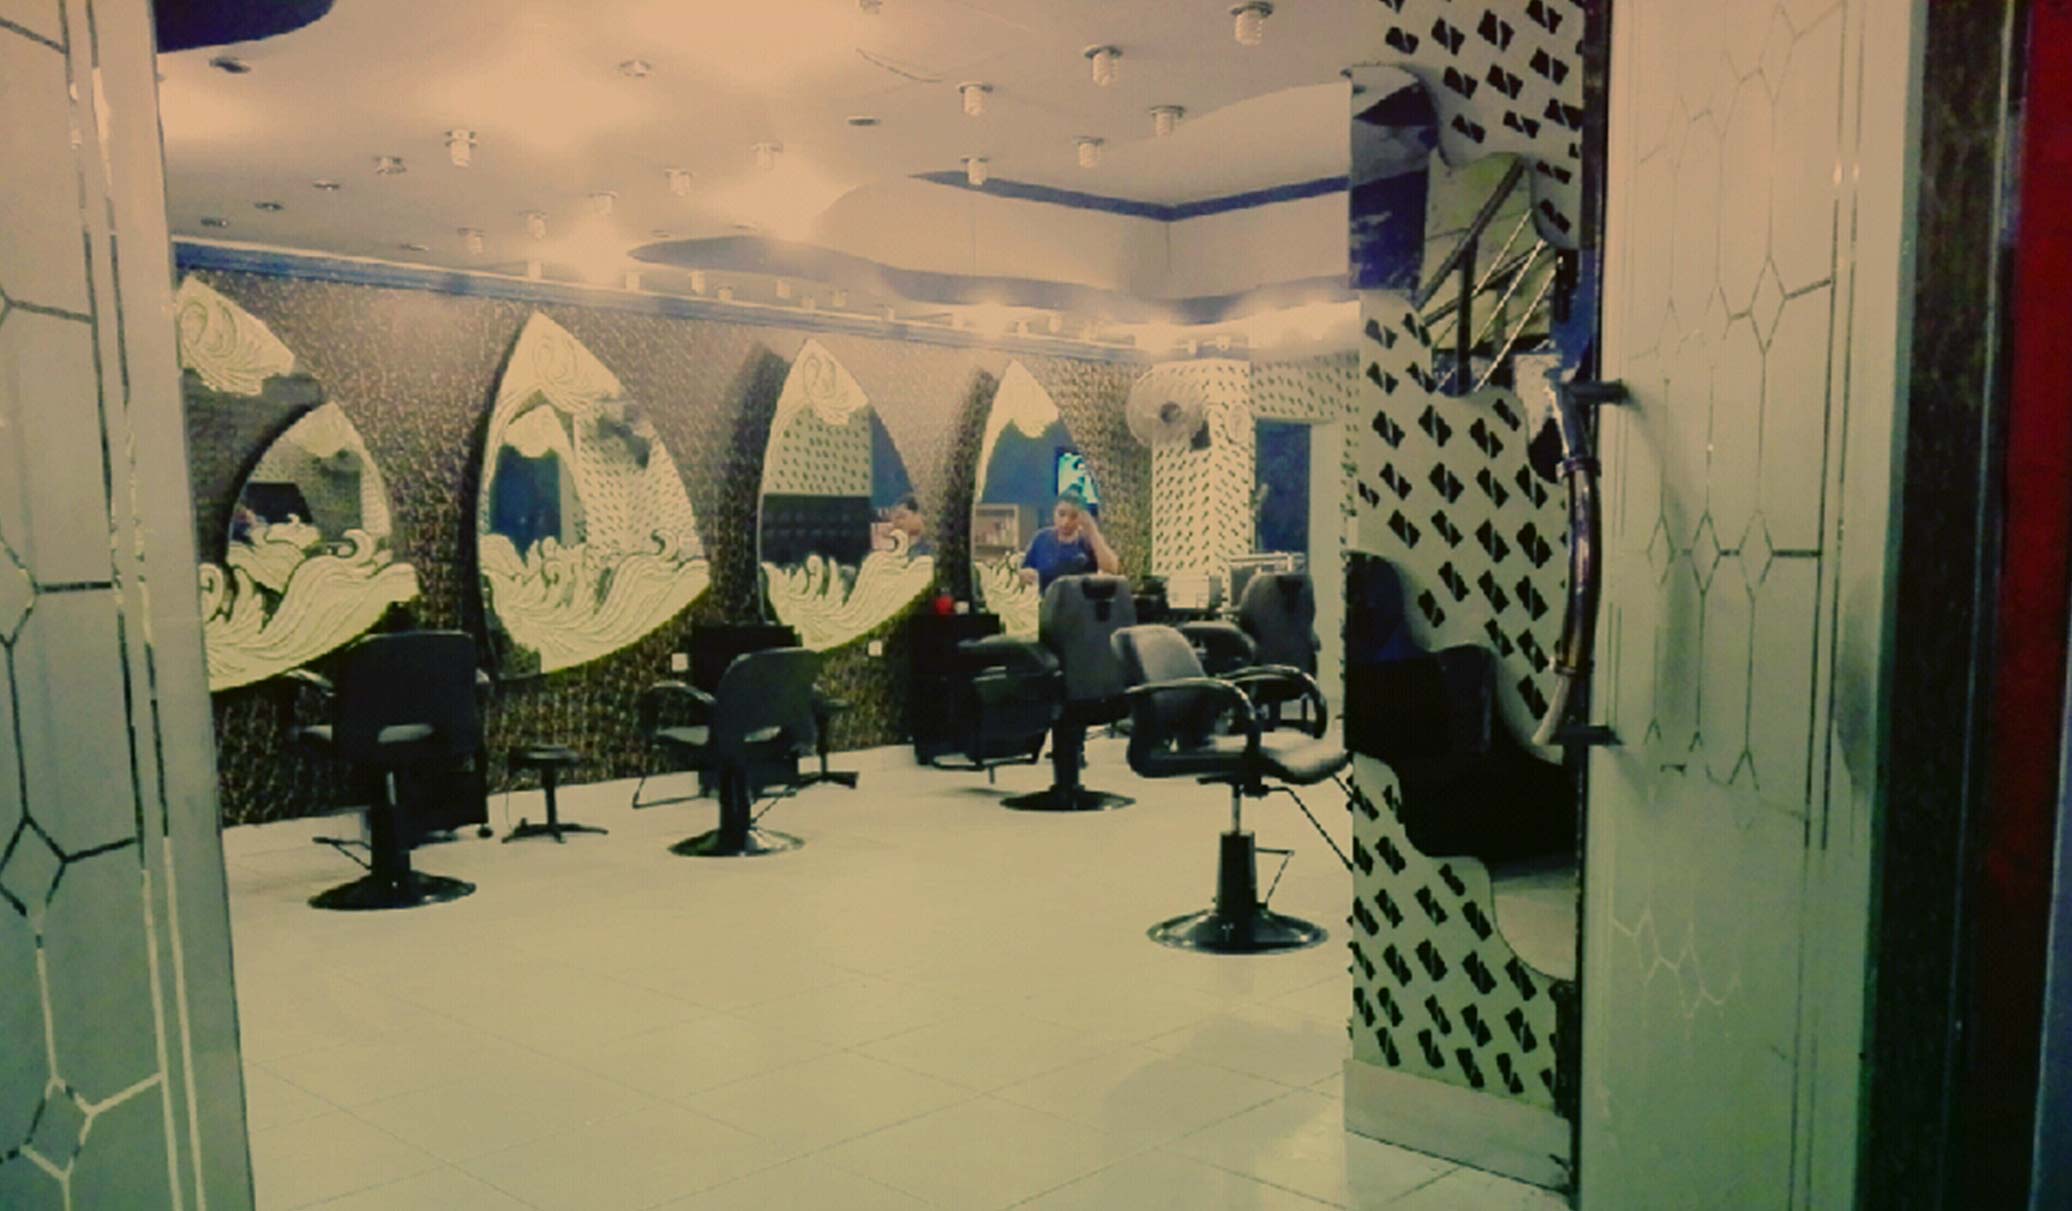 Ayesha's Salon Offers: 86% off, Rs 1199 only for Whitening Facial + Haircut + Hair Shampoo + Whitening Manicure + Whitening Pedicure + Shoulders Massage + Eyebrows & Upper Lip Threading at Ayesha's Salon & Spa Garden Town Lahore.